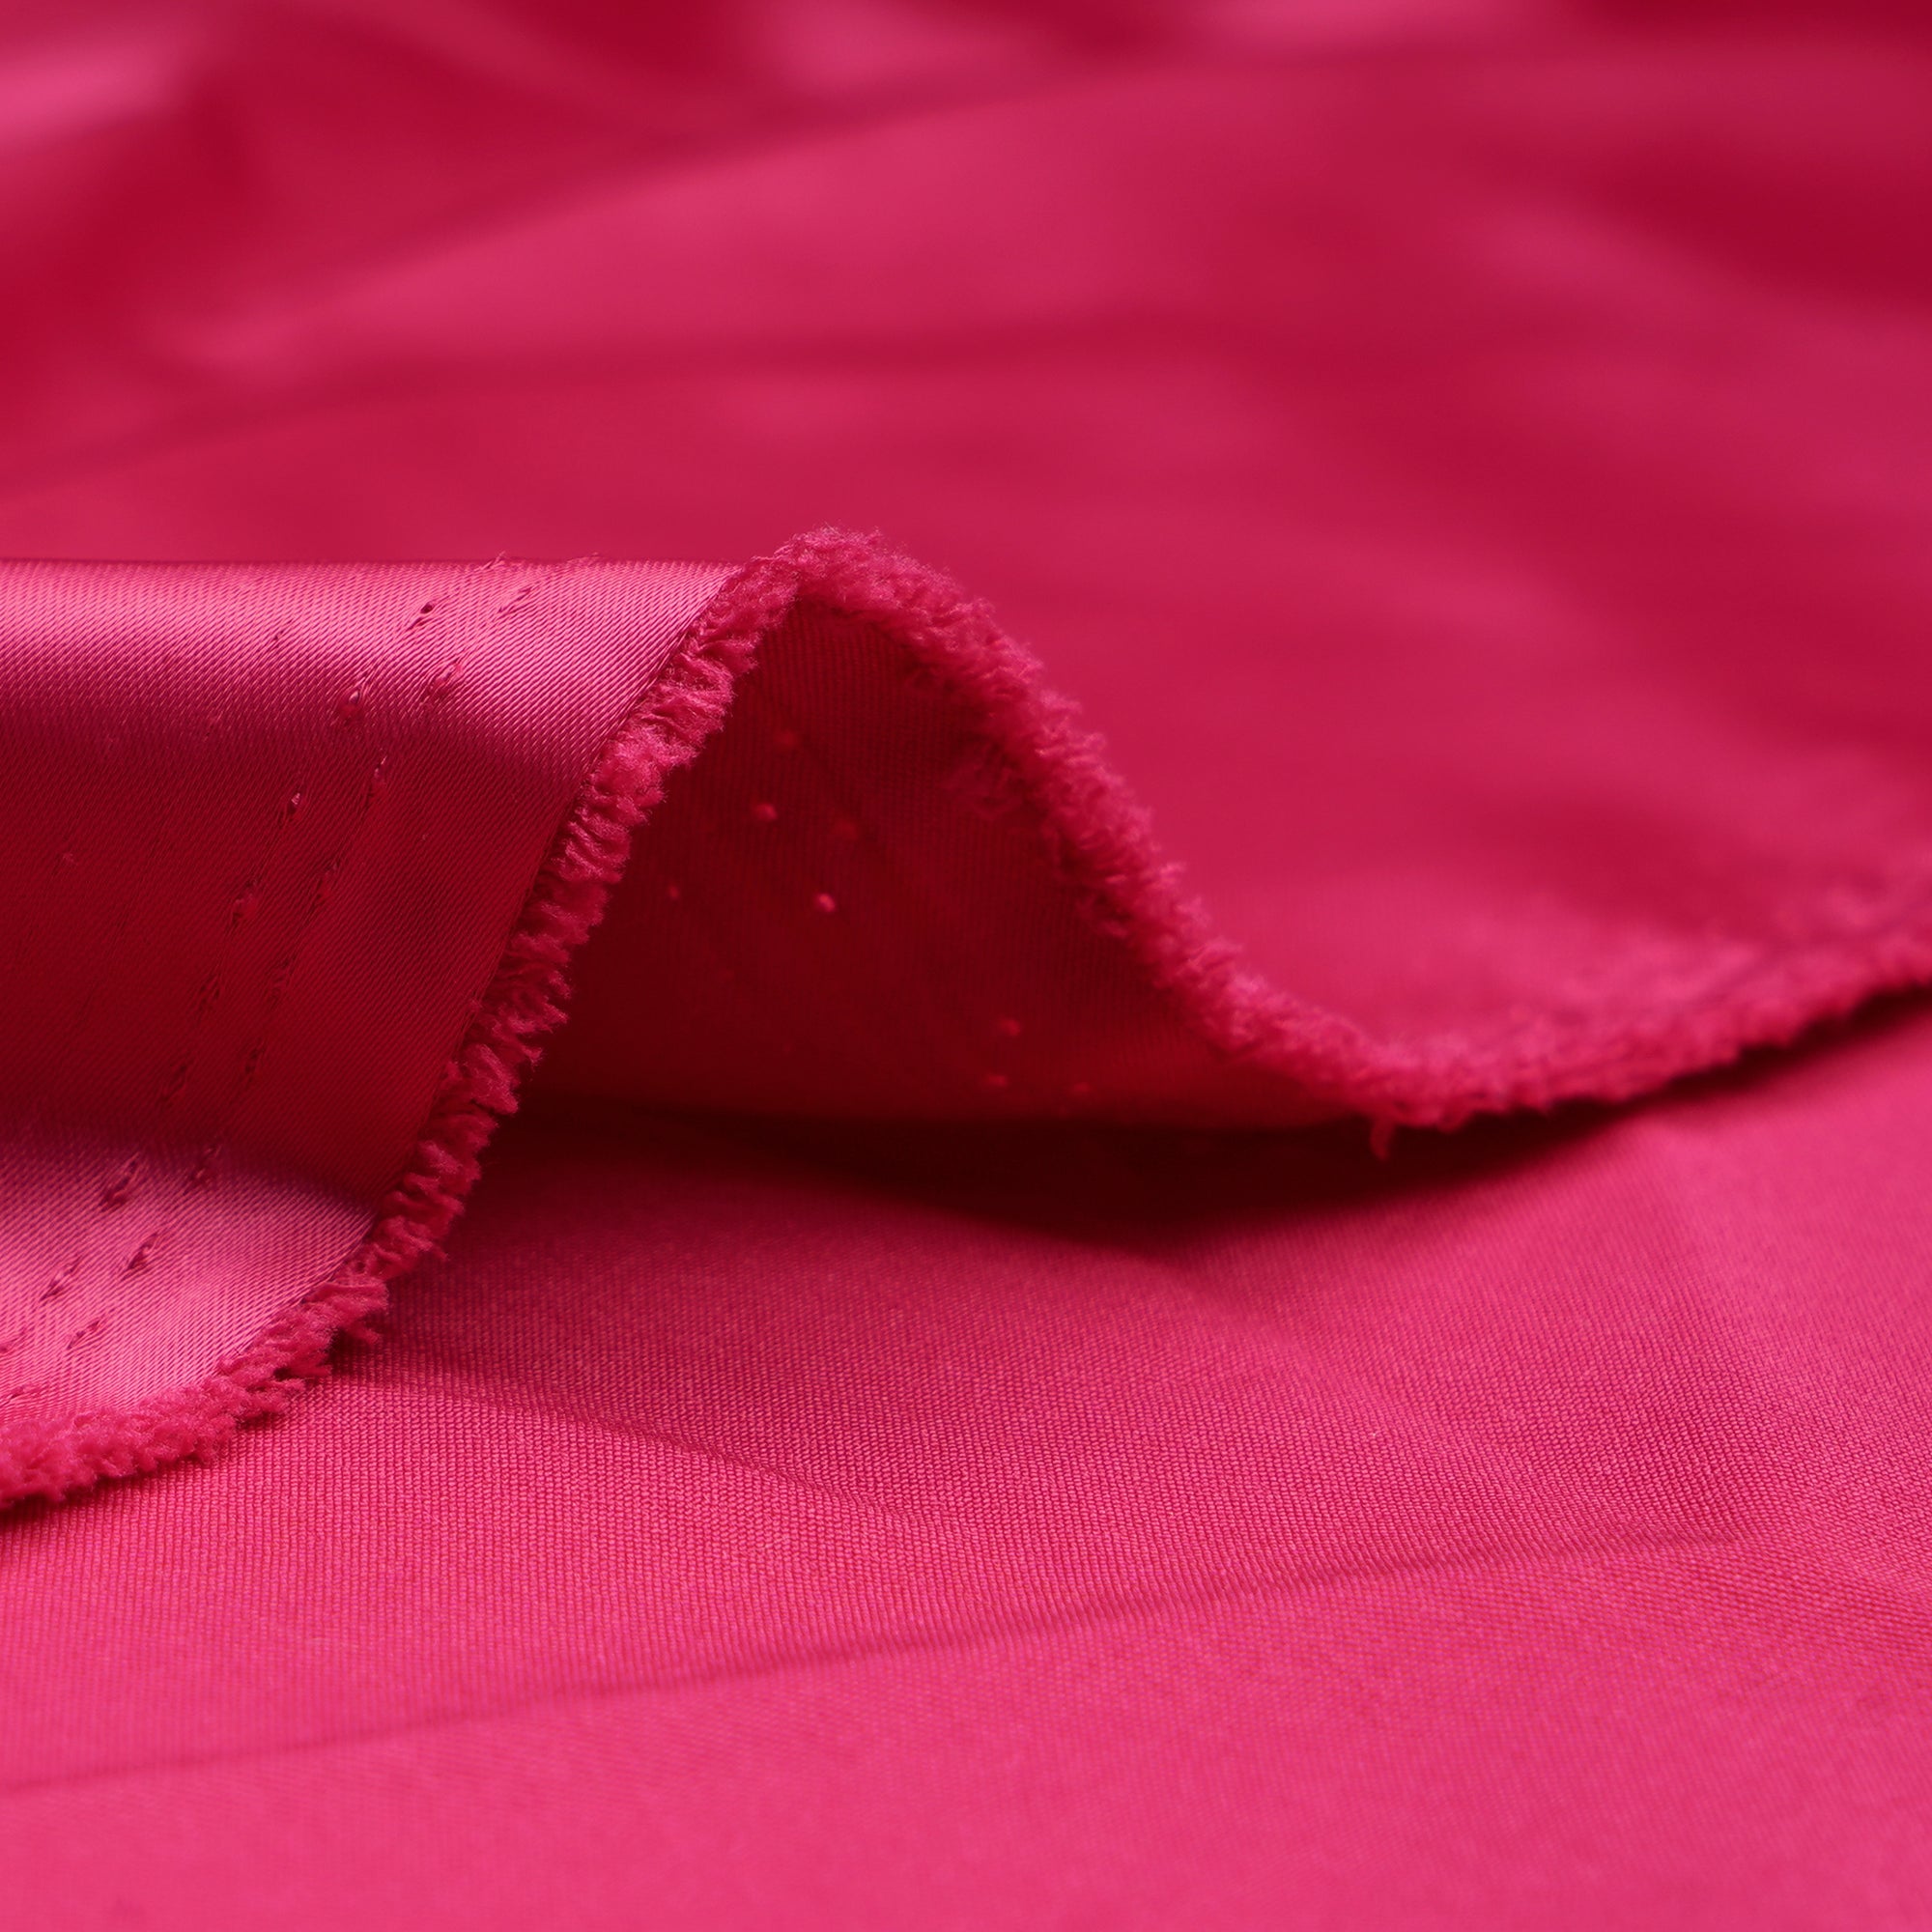 Hot Pink Solid Dyed Imported Duchess Satin Fabric (60" Width)